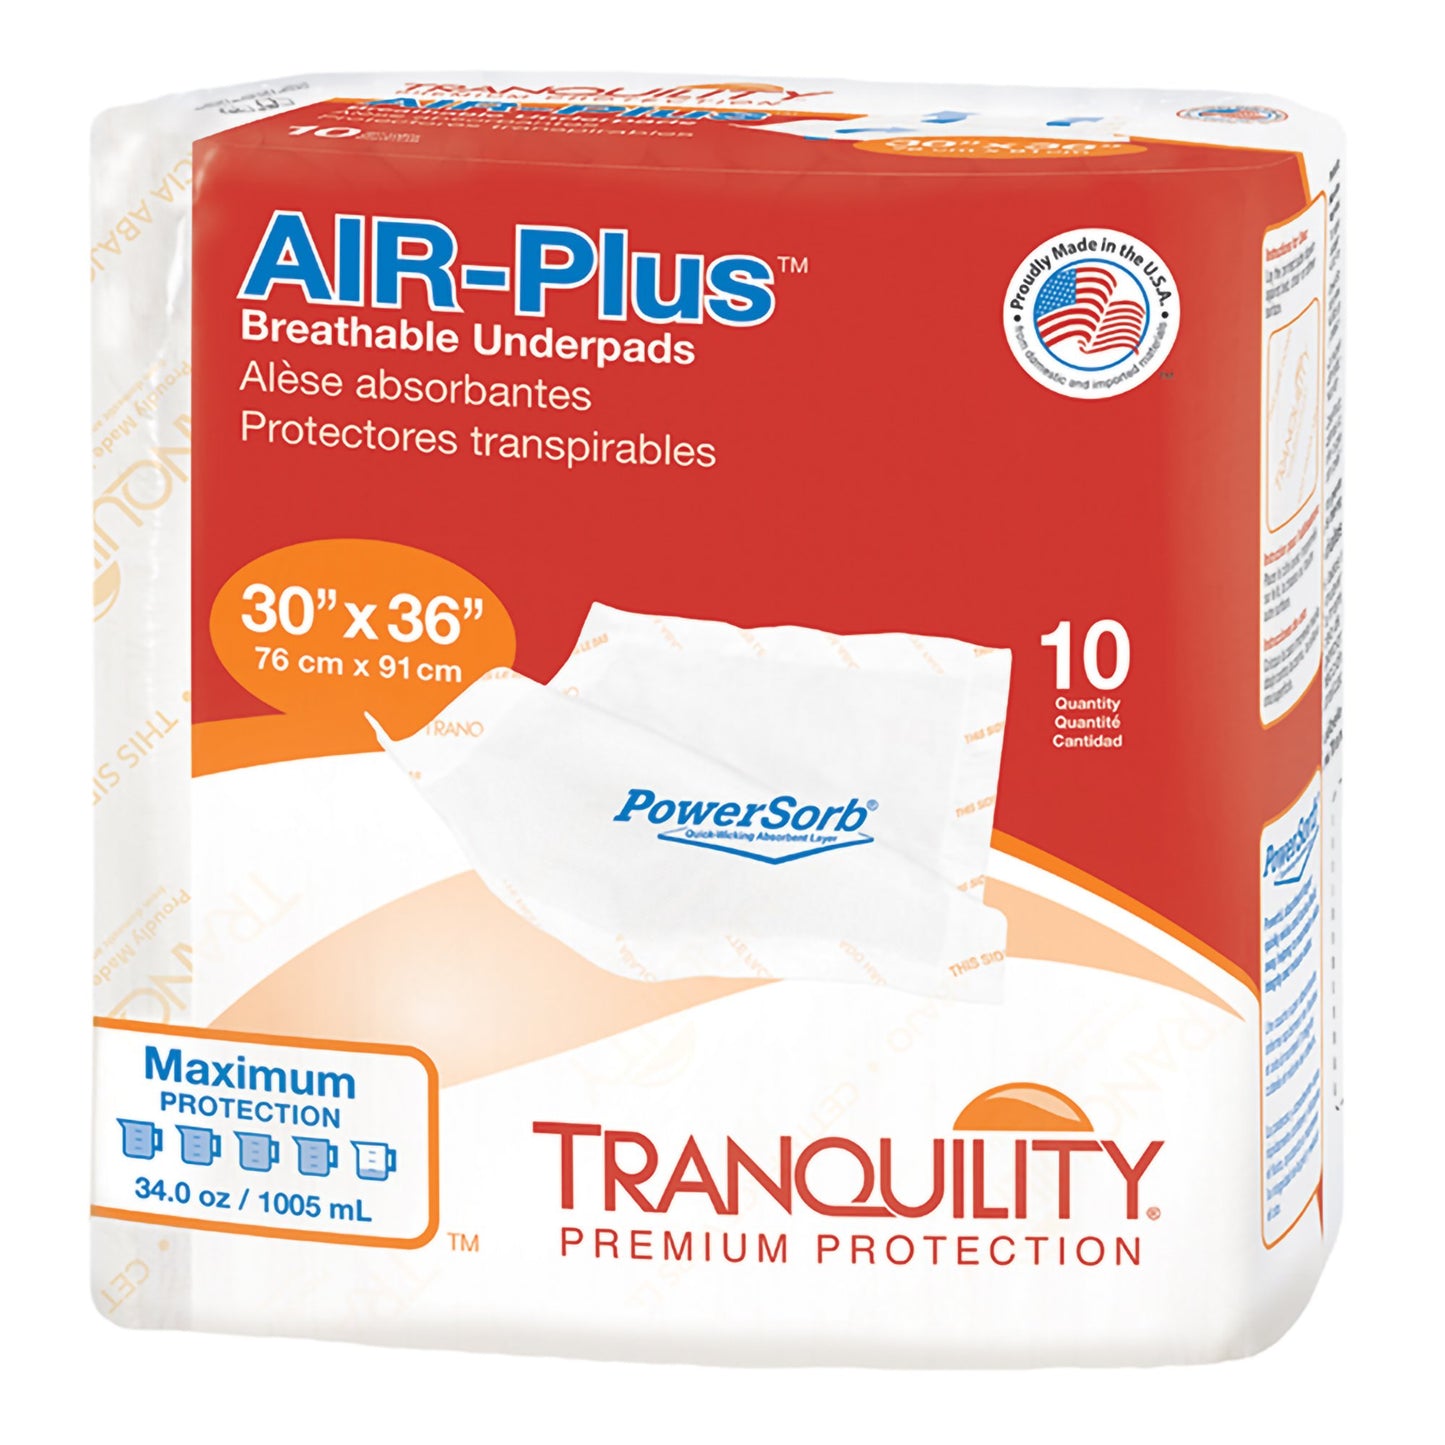 Tranquility AIR-Plus Breathable Underpads